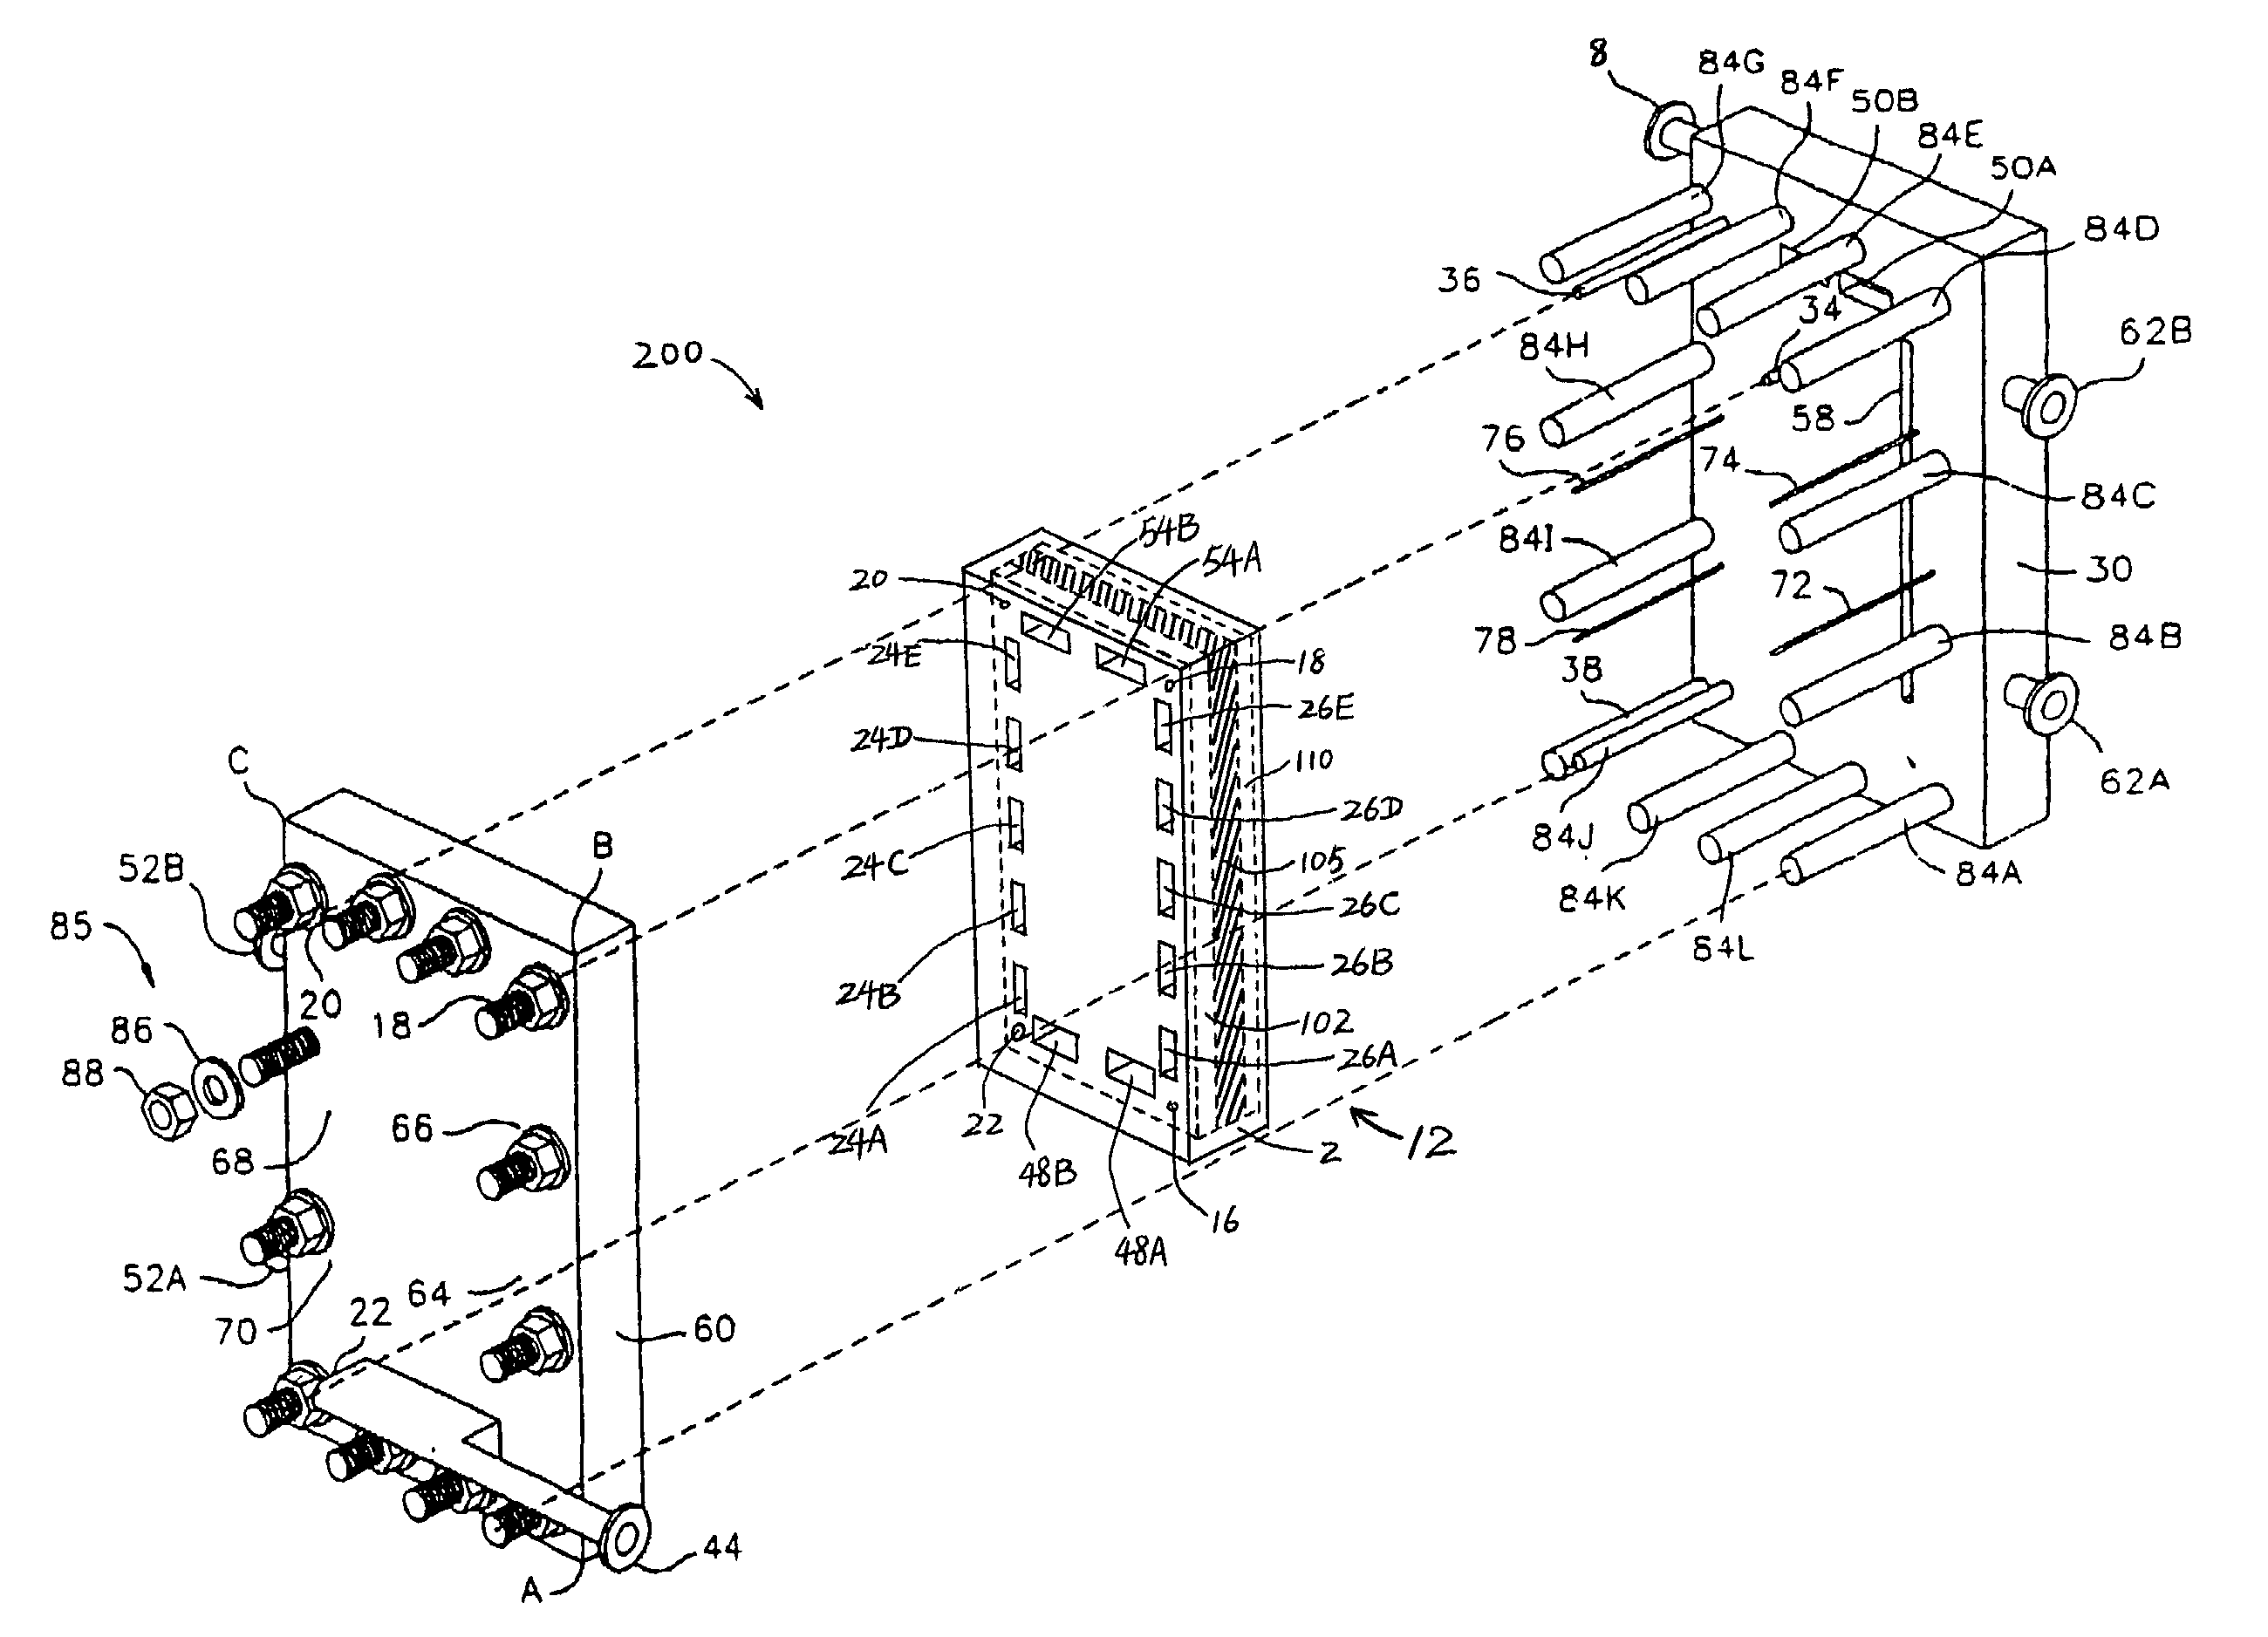 Integral gasketed filtration cassette article and method of making the same